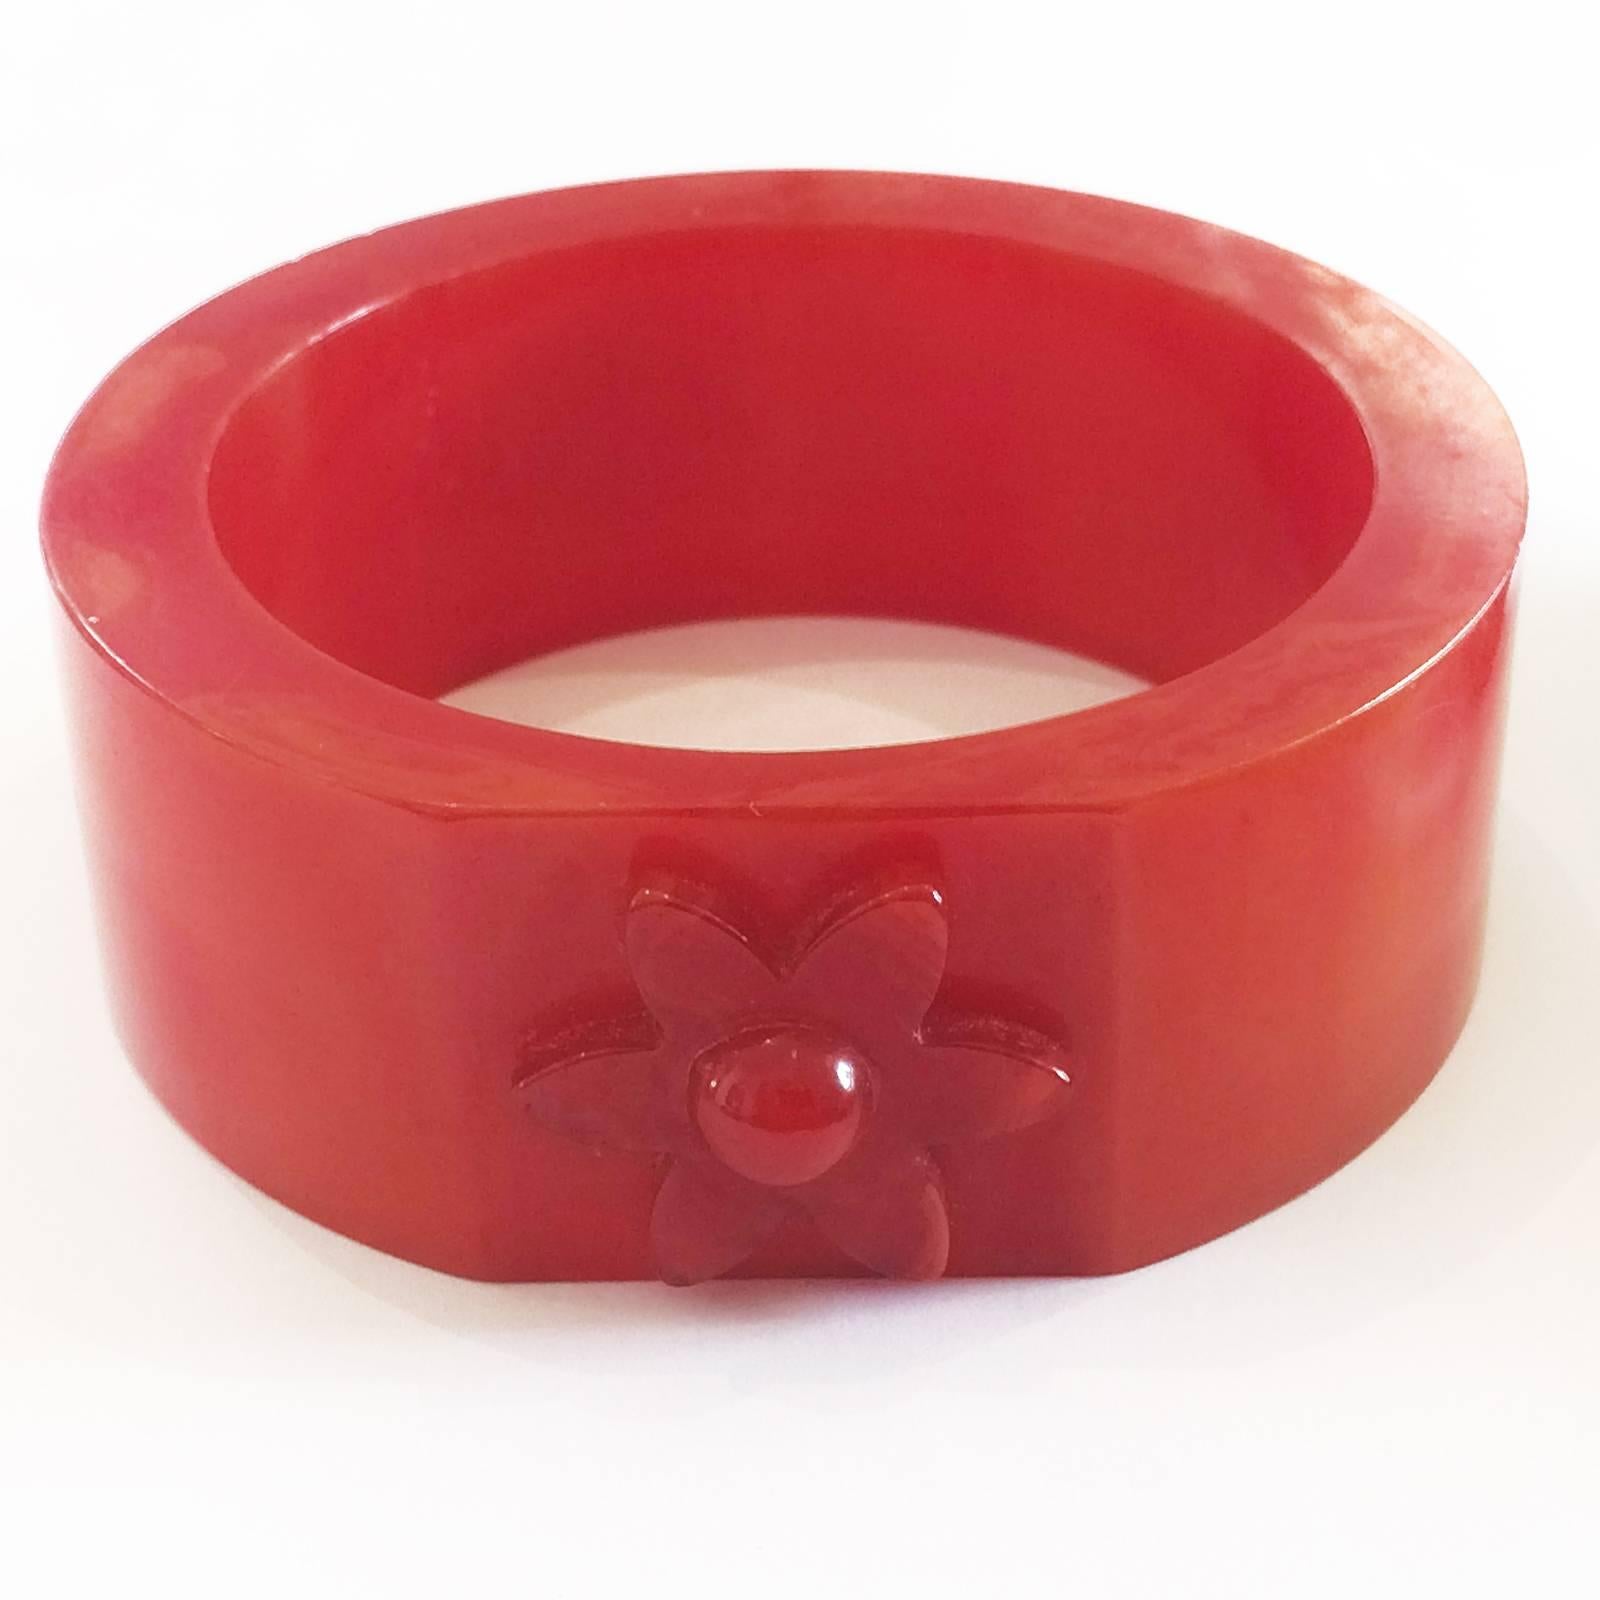 Art Deco heavy set Bangle in bright Marbled, Lipstick  Red coloured Bakelite, with raised, carved 6 pointed star, with hemi-sphere to centre. All in perfect condition, with no damage, repairs or losses at all to the bangle. One of the best you will